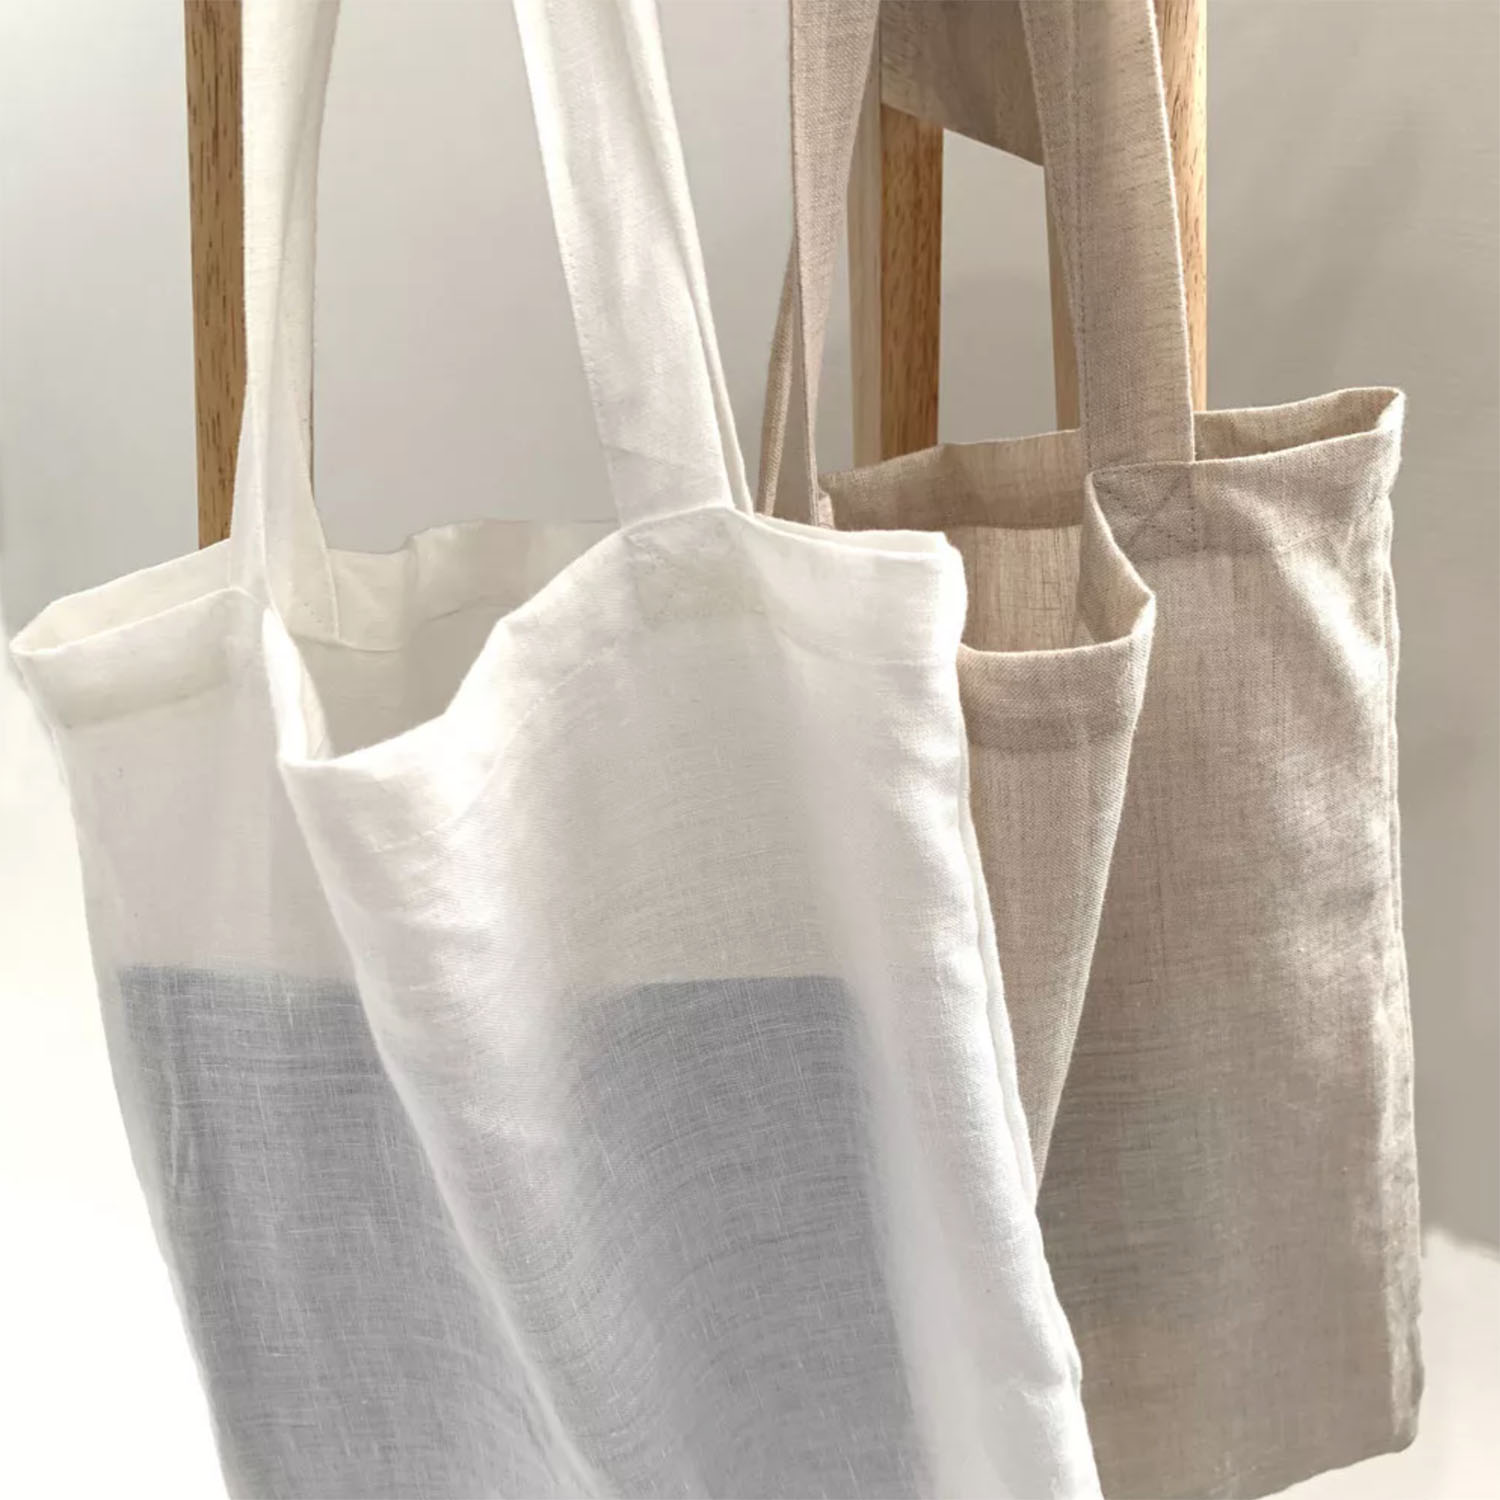 Solid Color Linen Fabric Tote Bag For Shopping Or Freetime - PRESTIGE CREATIONS FACTORY | CUSTOM - CUSTOM PACKAGING BOXES - HOTEL AMENITIES